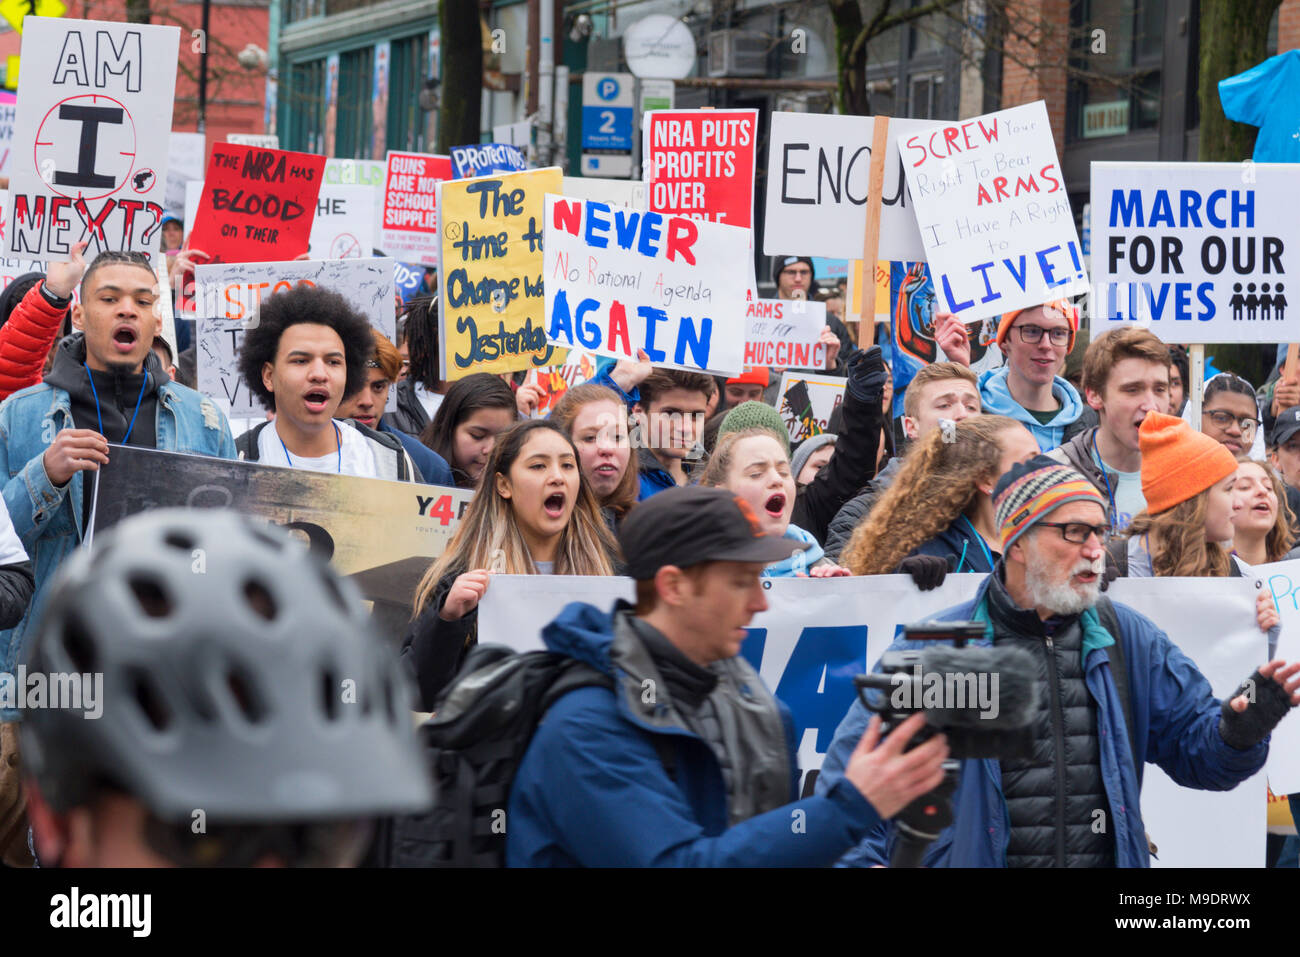 Seattle Washington, March 24th 2018 The March for our Lives rally with many students, children, youth, kids, families, parents and supporters chanting. Stock Photo